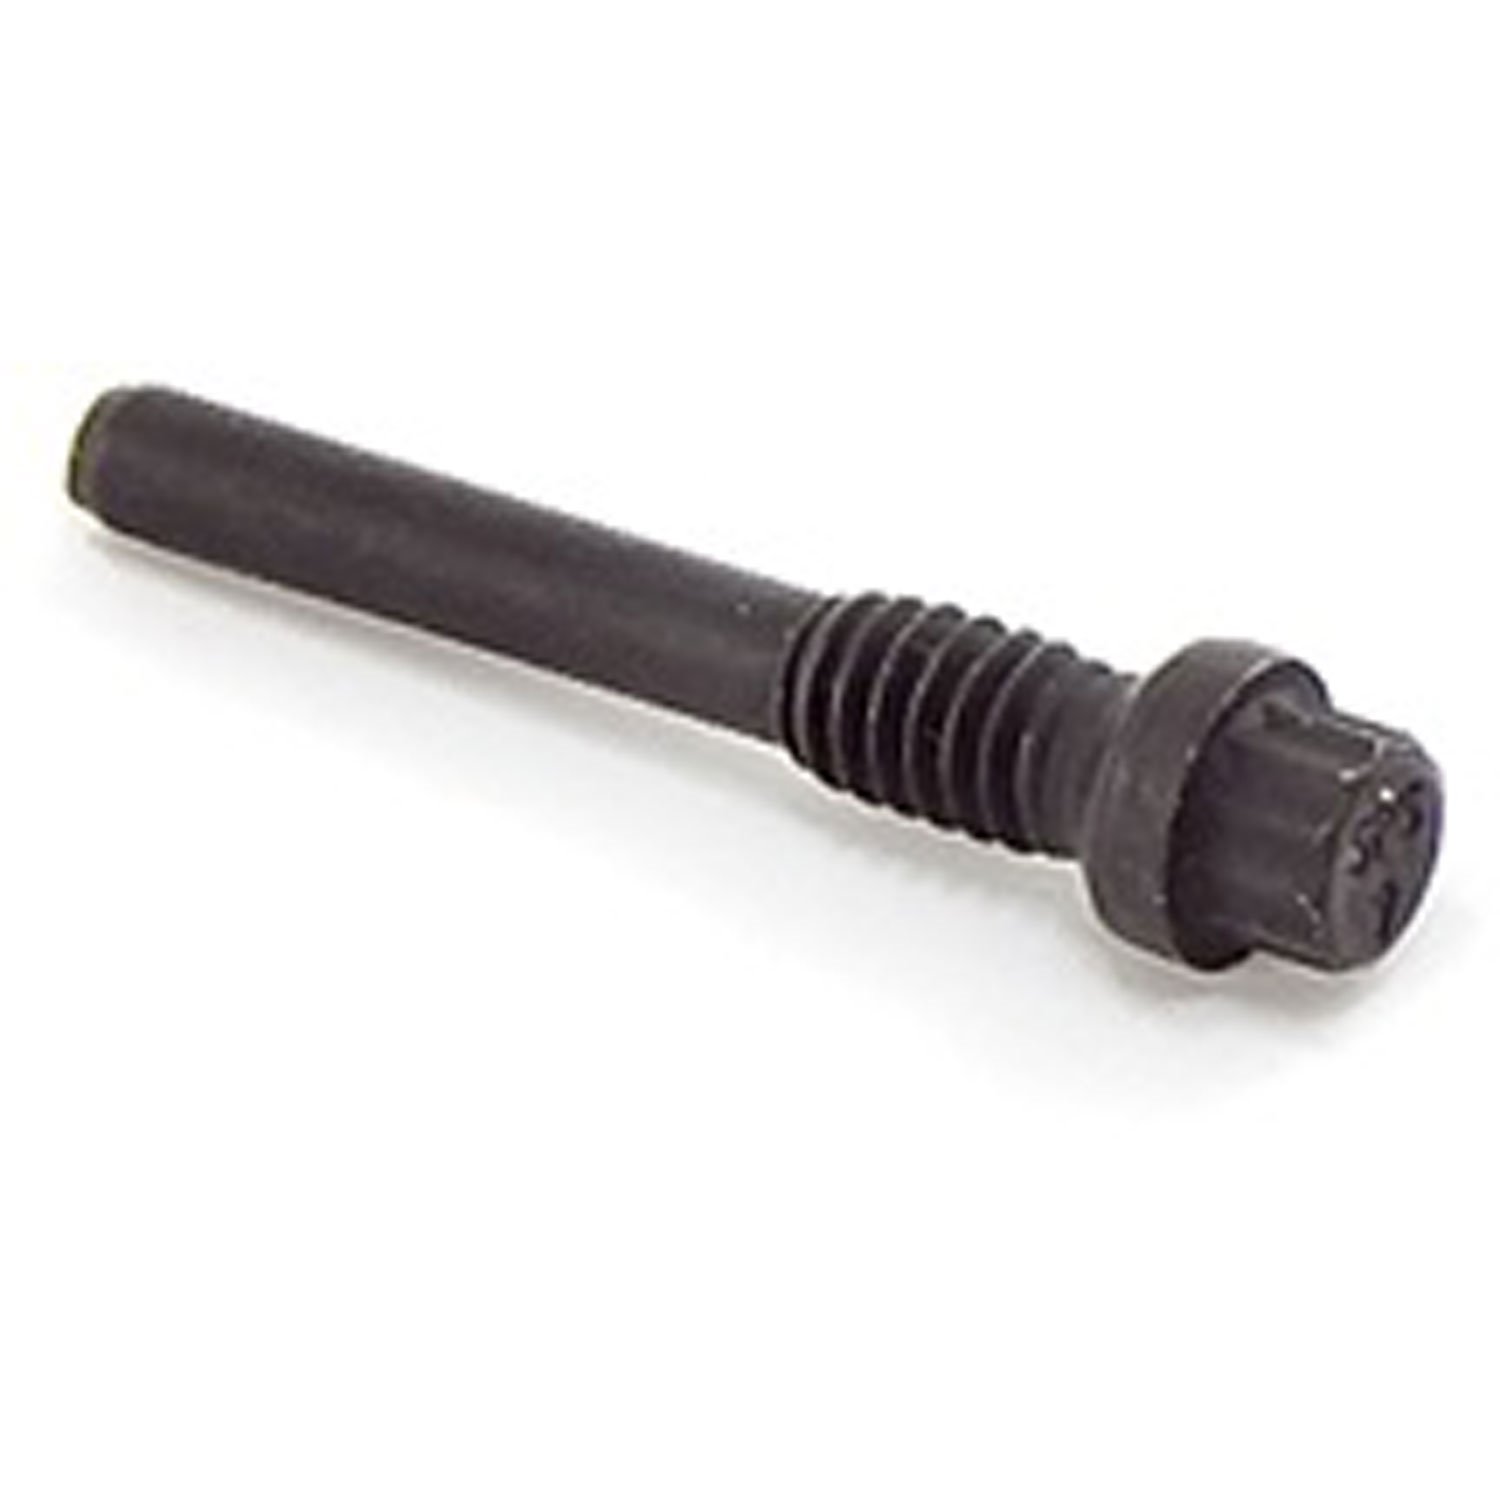 This Dana 44 differential cross shaft bolt from Omix-ADA fits 90-01 Jeep Cherokees 90-92 Comanches 9